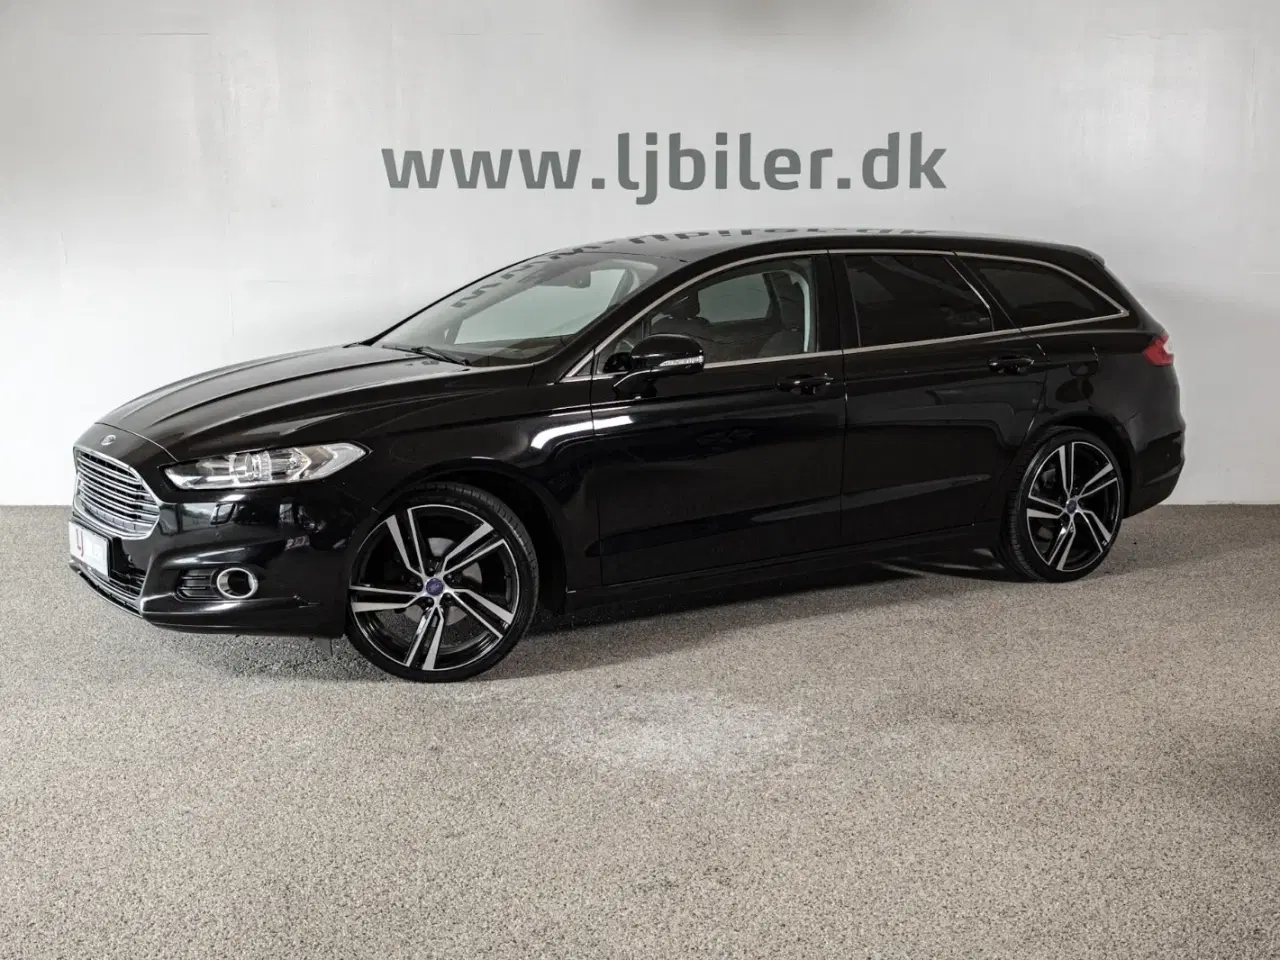 Billede 1 - Ford Mondeo 2,0 TDCi 150 Business stc.